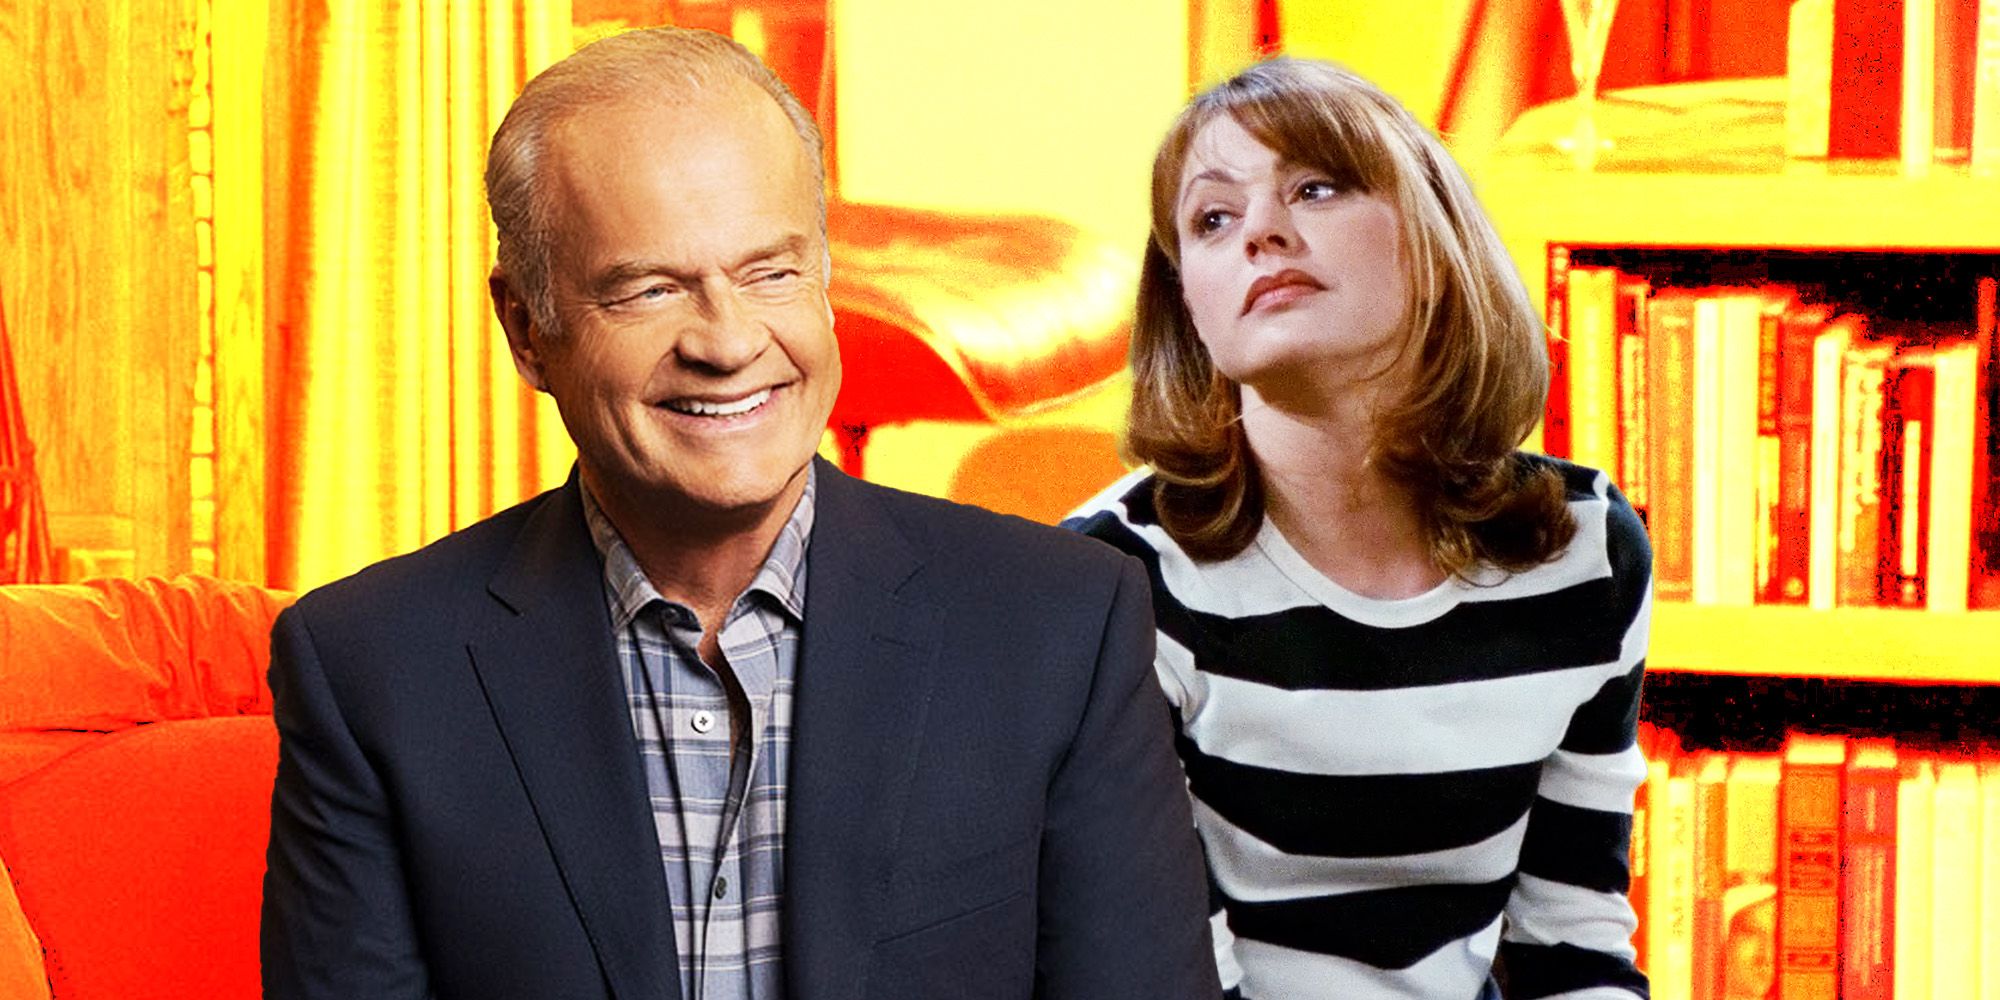 Collage of Frasier and Daphne